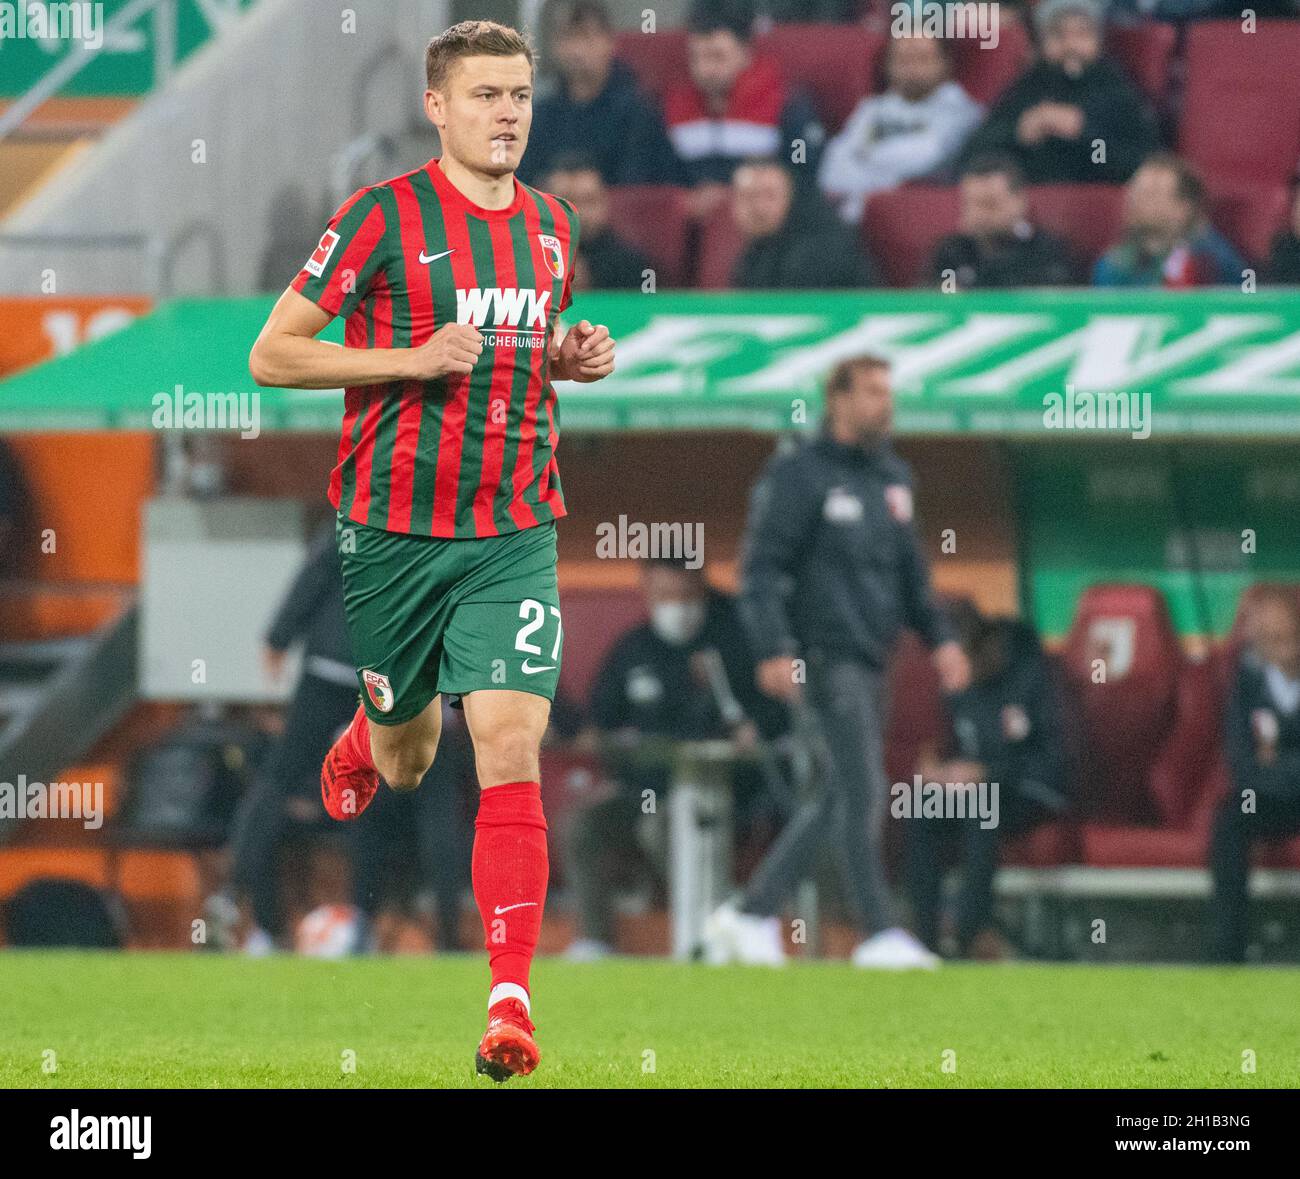 Augsburg, Germany. 17th Oct, 2021. Football: Bundesliga, FC Augsburg - Arminia Bielefeld, Matchday 8, at WWK Arena. Augsburg's Alfred Finnbogason runs onto the field. Credit: Stefan Puchner/dpa - IMPORTANT NOTE: In accordance with the regulations of the DFL Deutsche Fußball Liga and/or the DFB Deutscher Fußball-Bund, it is prohibited to use or have used photographs taken in the stadium and/or of the match in the form of sequence pictures and/or video-like photo series./dpa/Alamy Live News Stock Photo